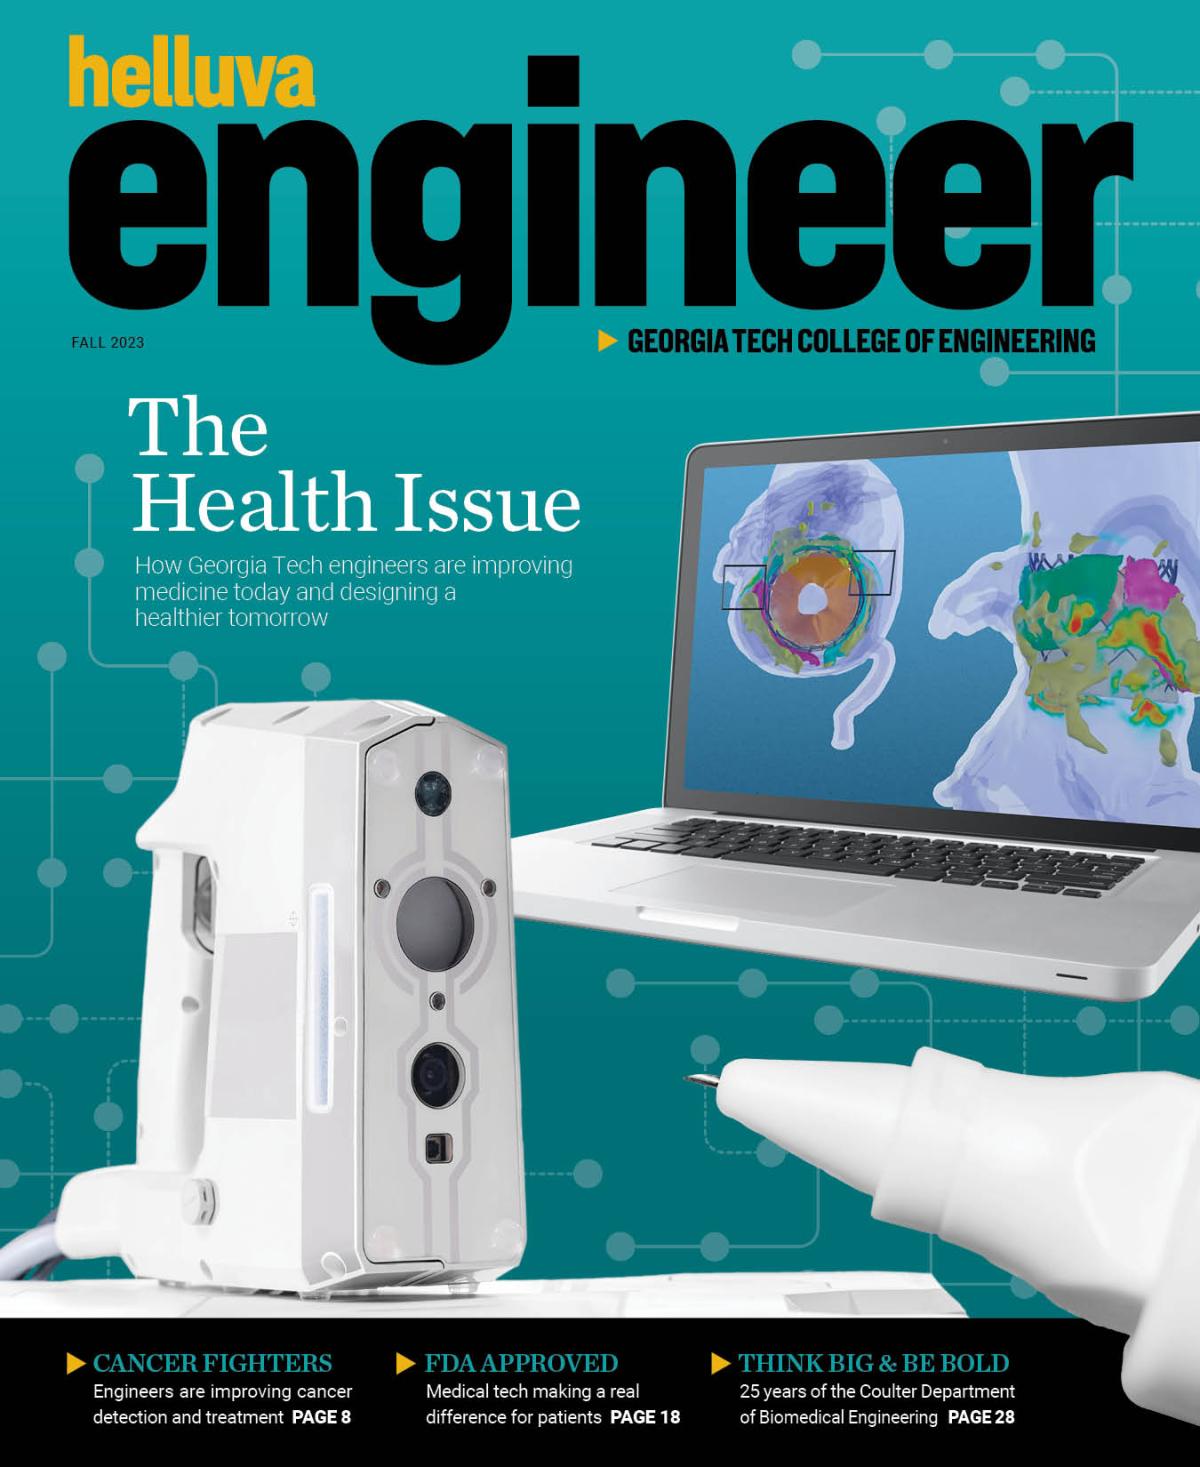 thumbnail image of the fall 2023 magazine cover featuring the "Helluva Engineer" flag, "The Health Issue" title, and FDA device imagery